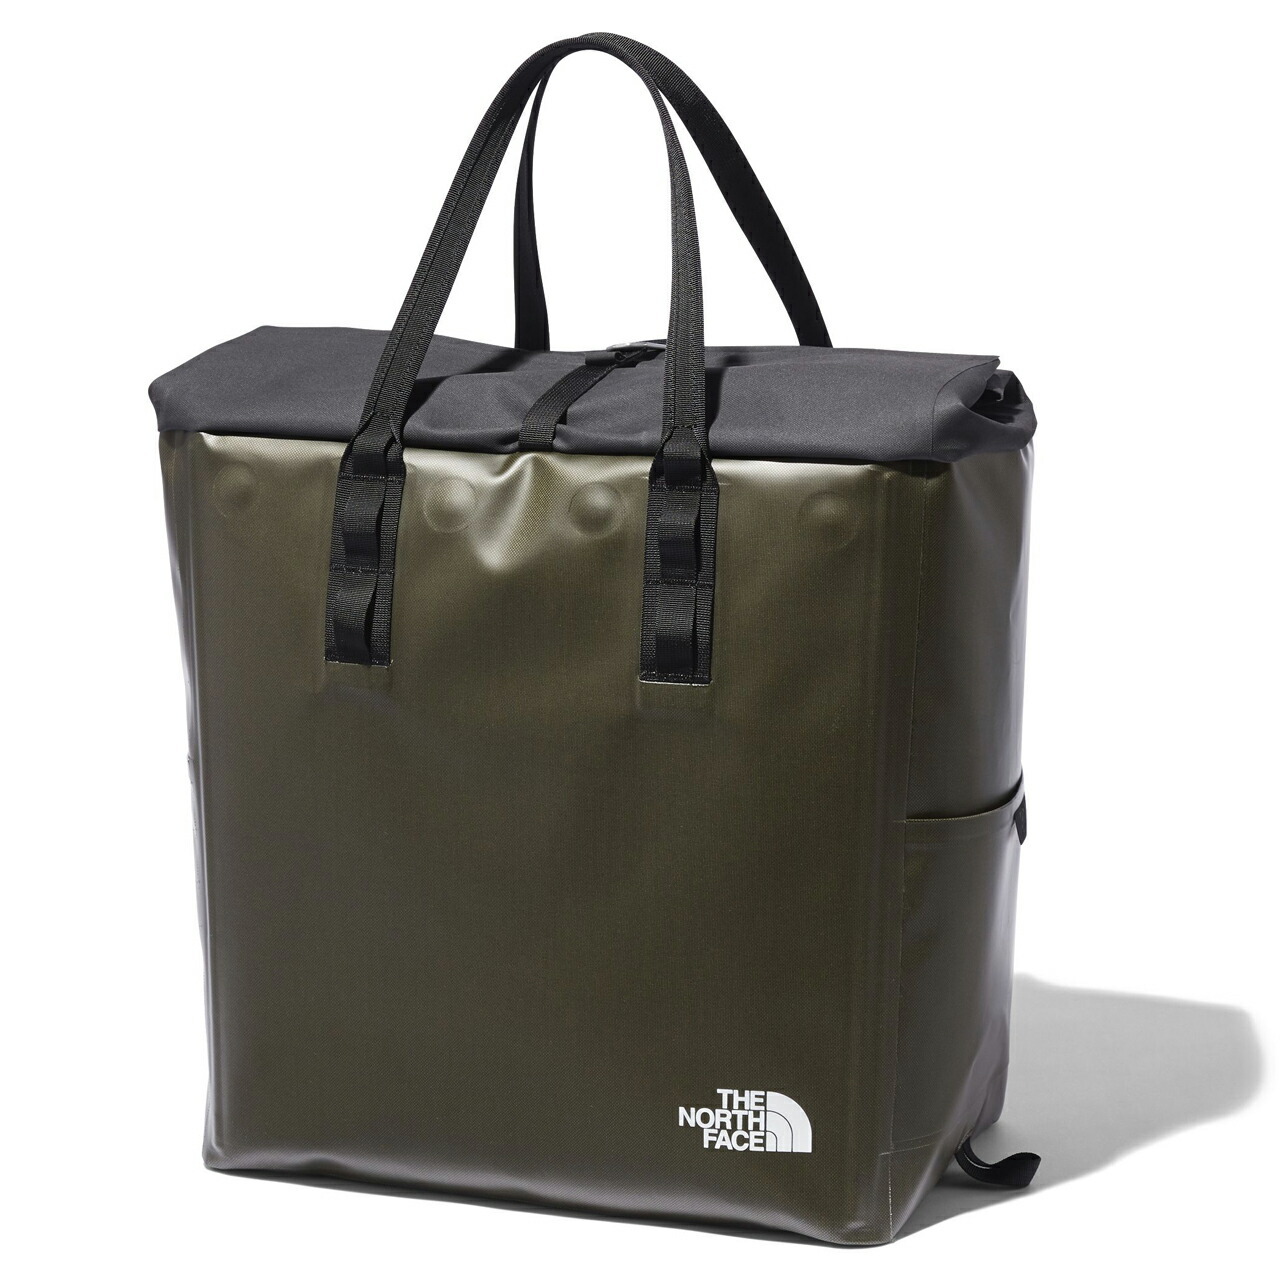 THE NORTH FACE [ザ・ノース・フェイス] Fieludens Trash Tote[NM82112]_f0051306_05430043.jpg